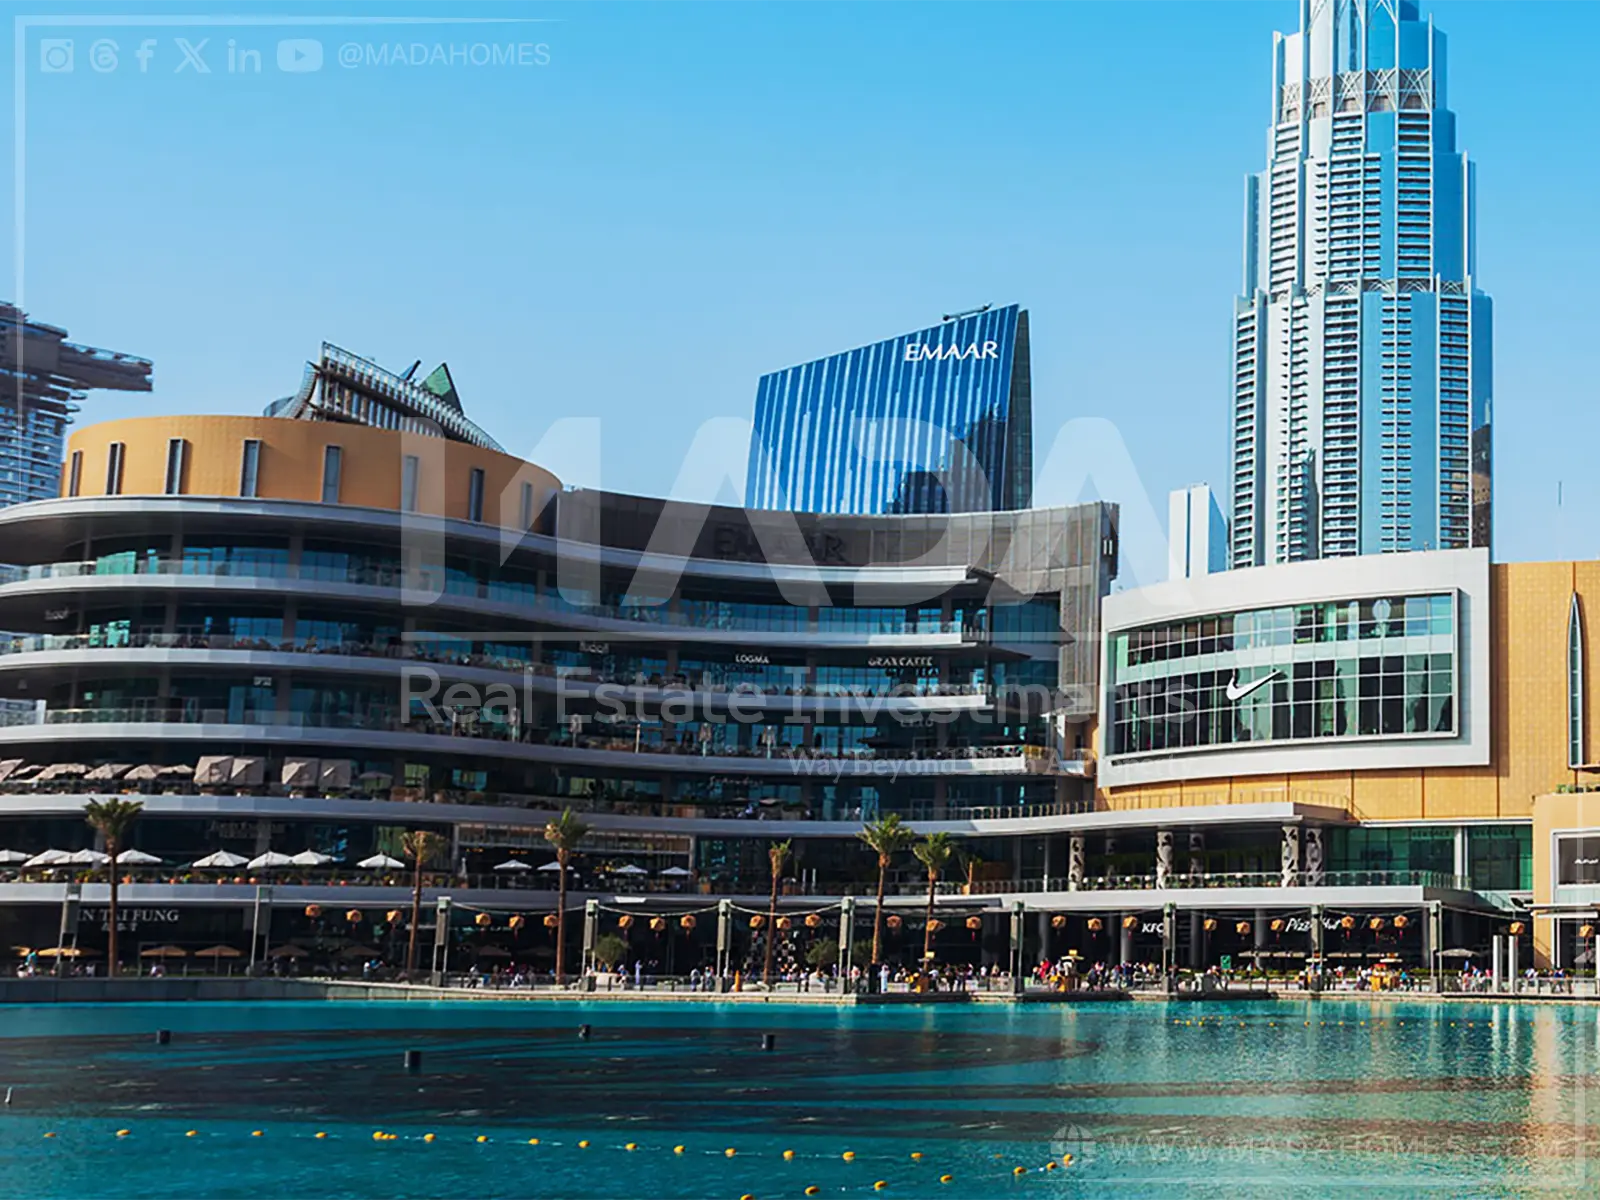 Who is the owner of Emaar Company? Get to know him